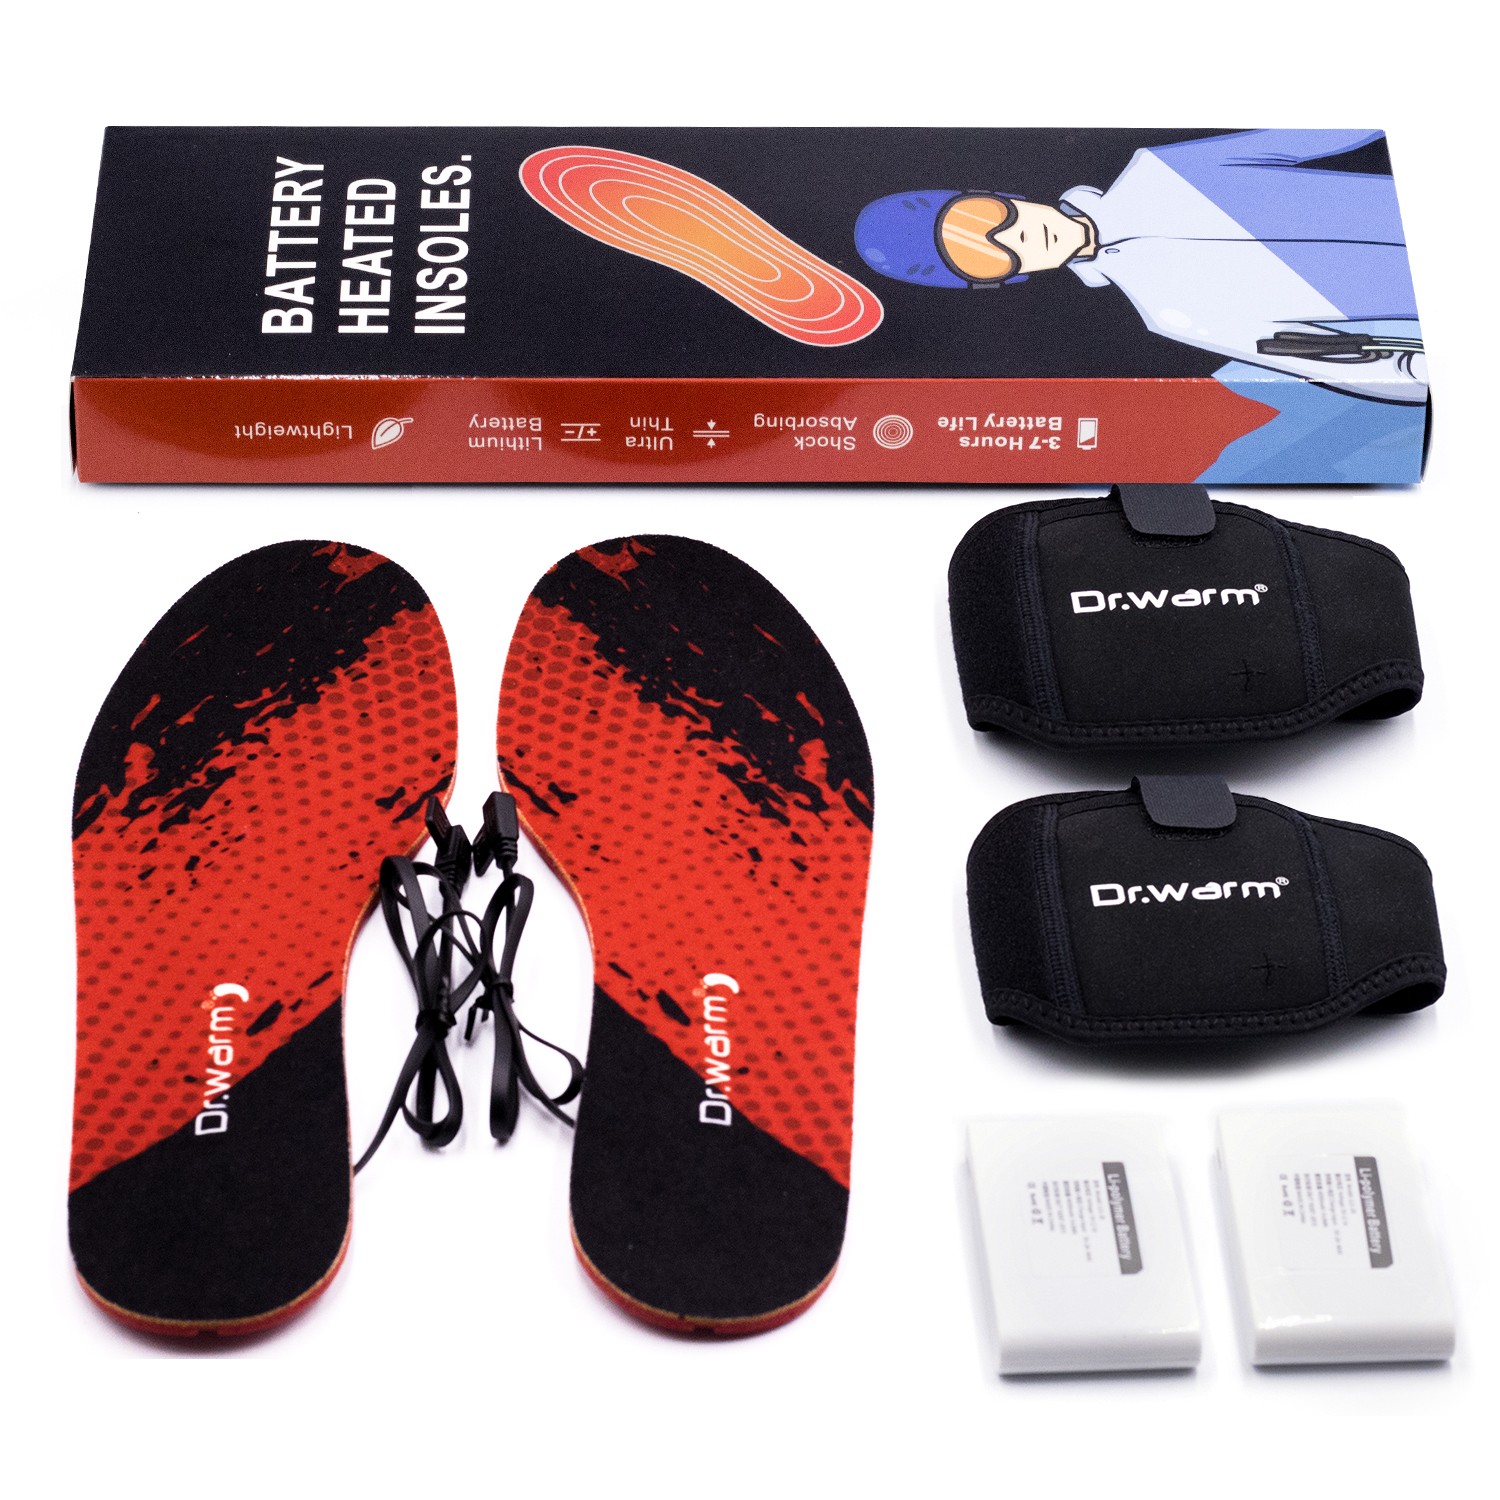 Dr. Warm electric heated insoles-20